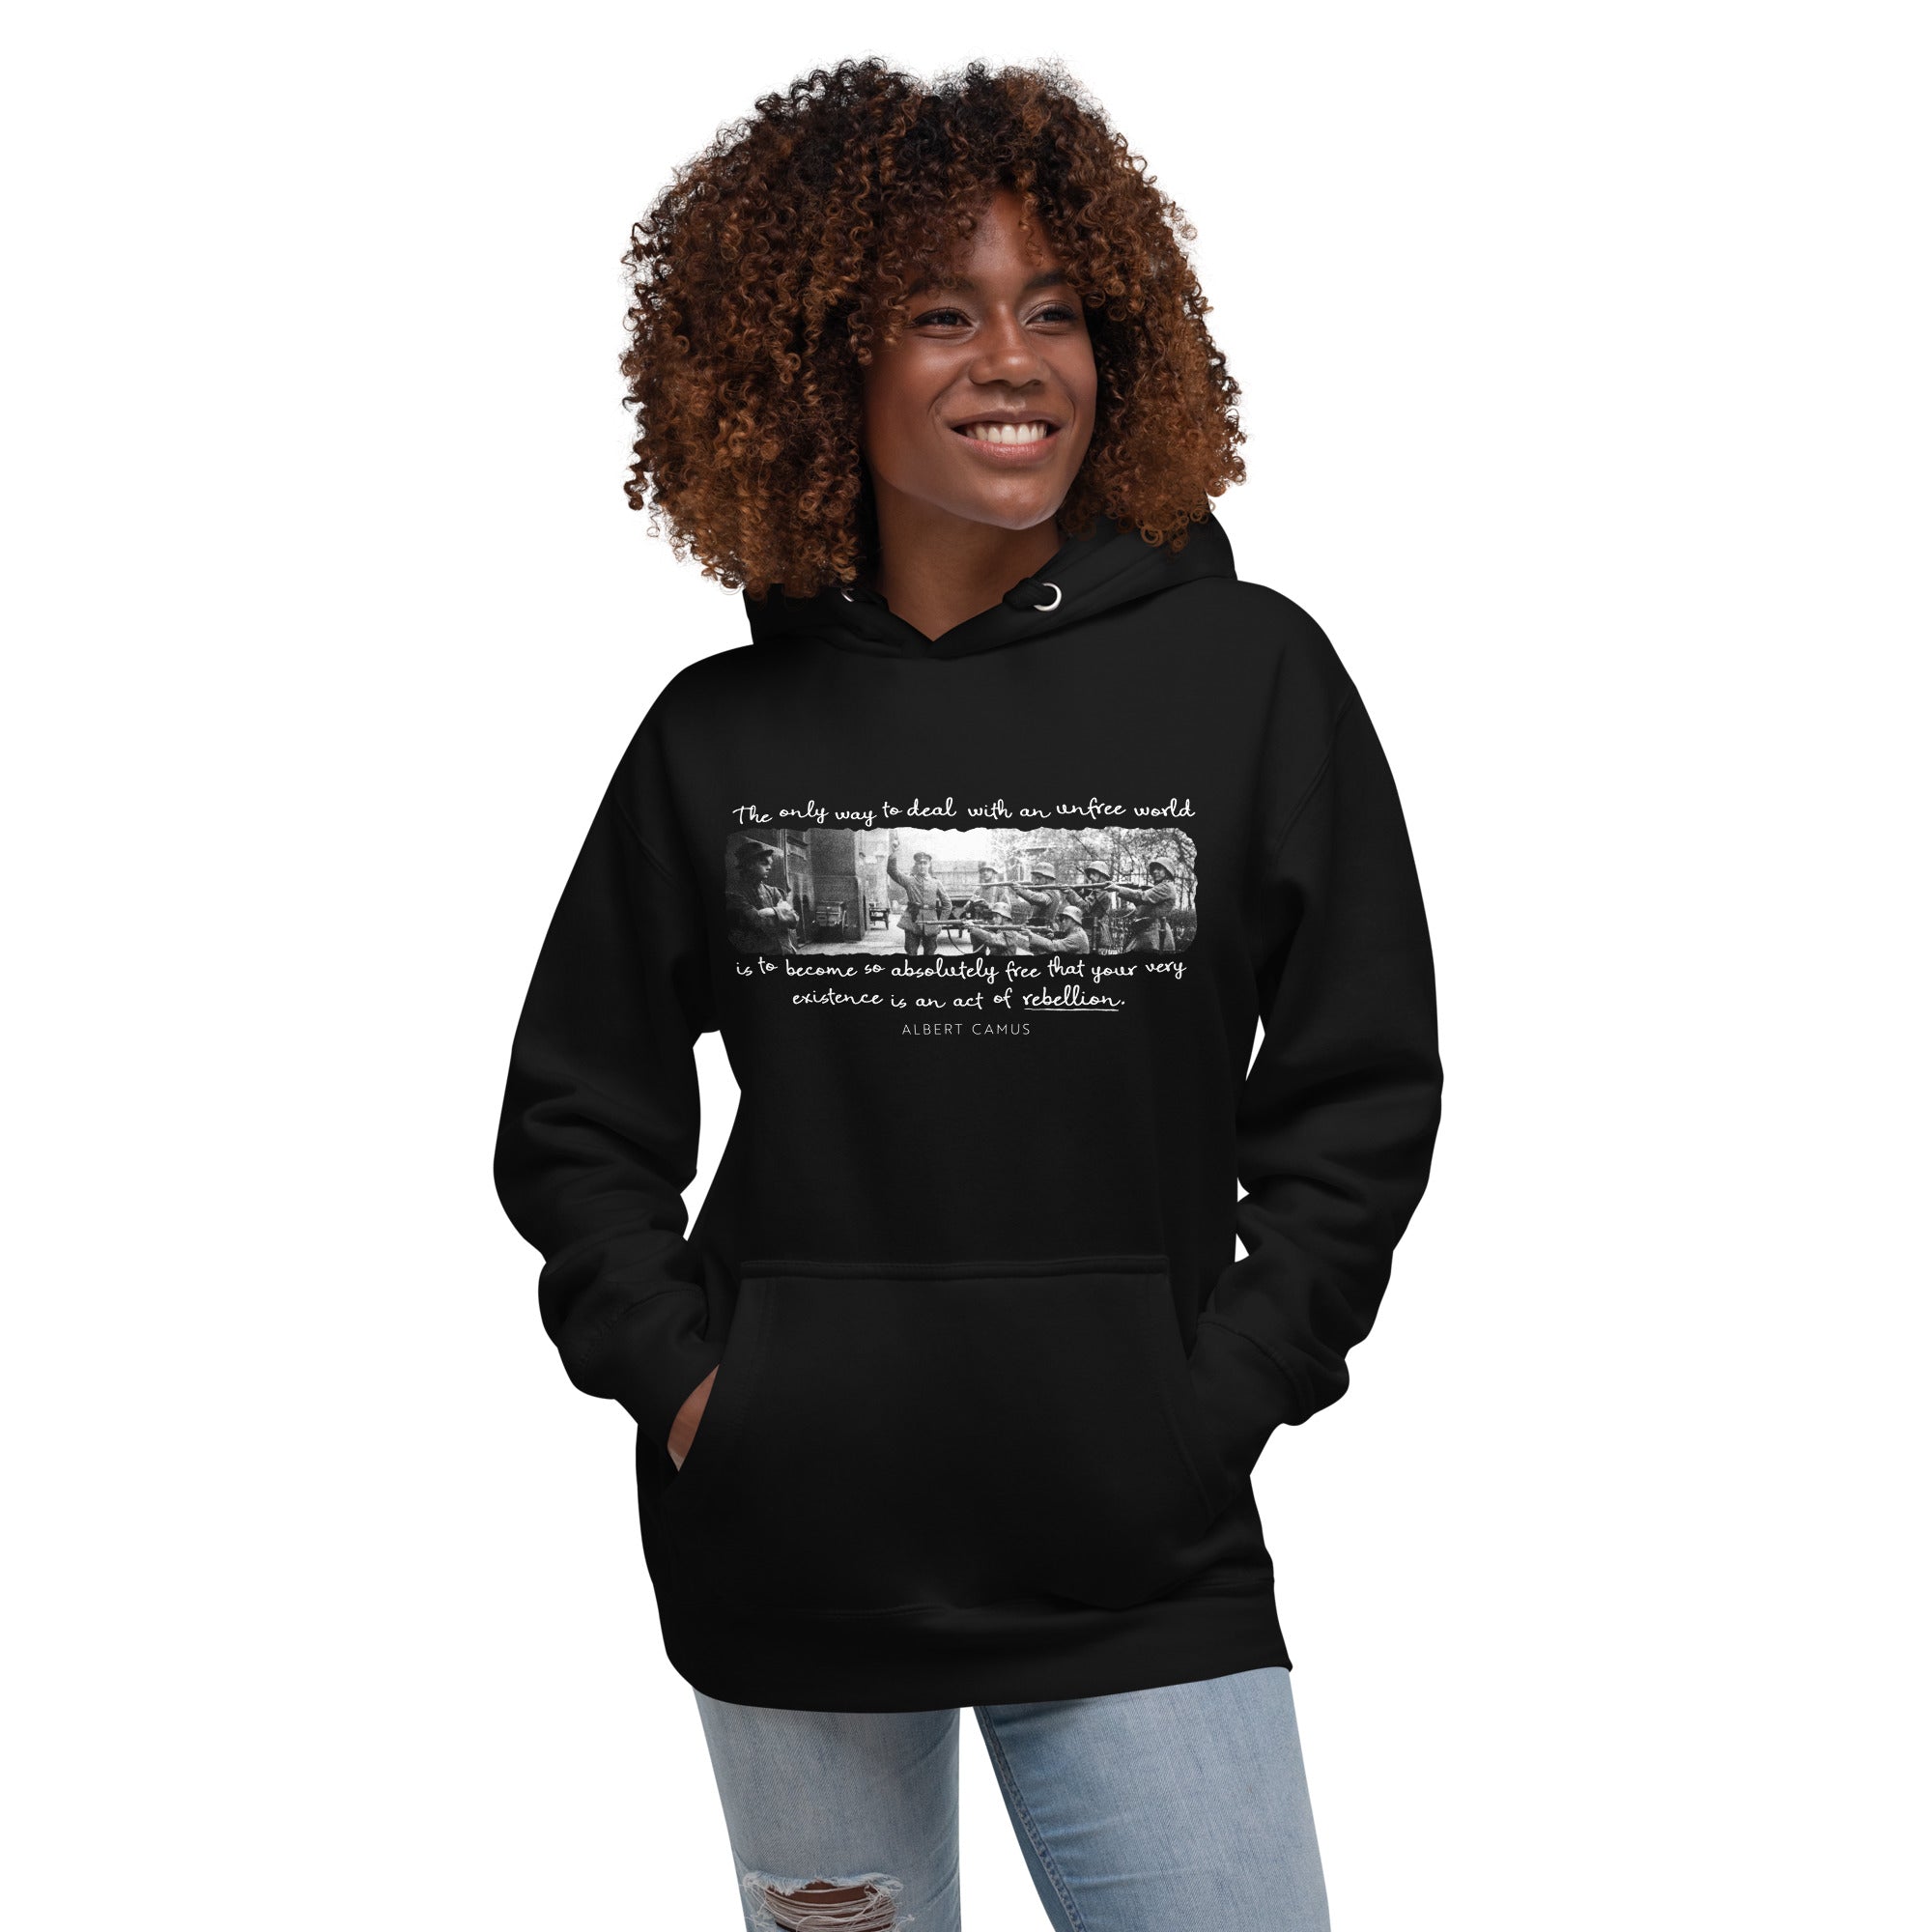 Albert Camus The Only Way to Deal with an Unfree World Unisex Hoodie